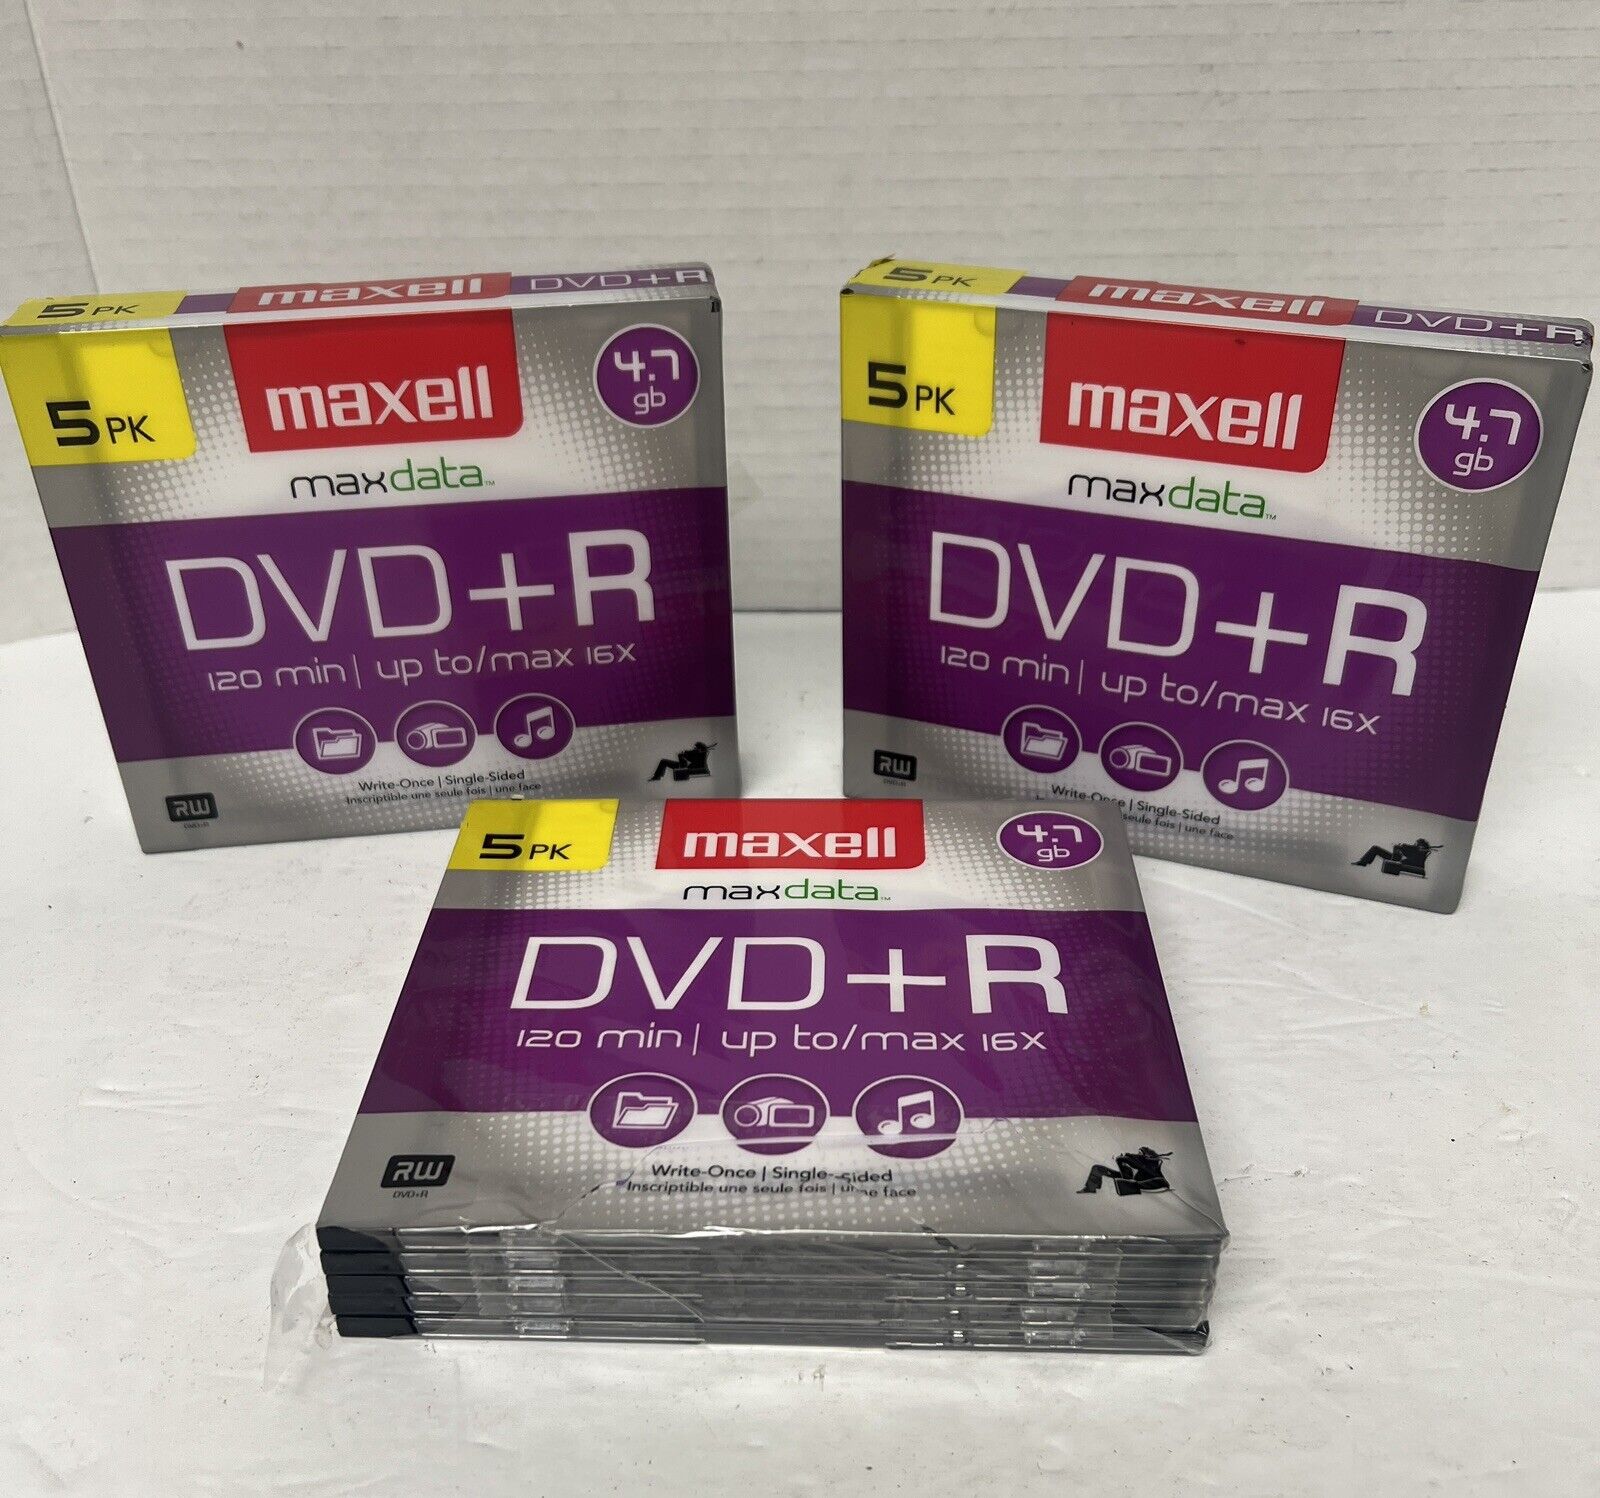 Maxell 044862-00 DVD+R Data & Video 5pk (3 Packs of 5) Blank with Jewel Cases